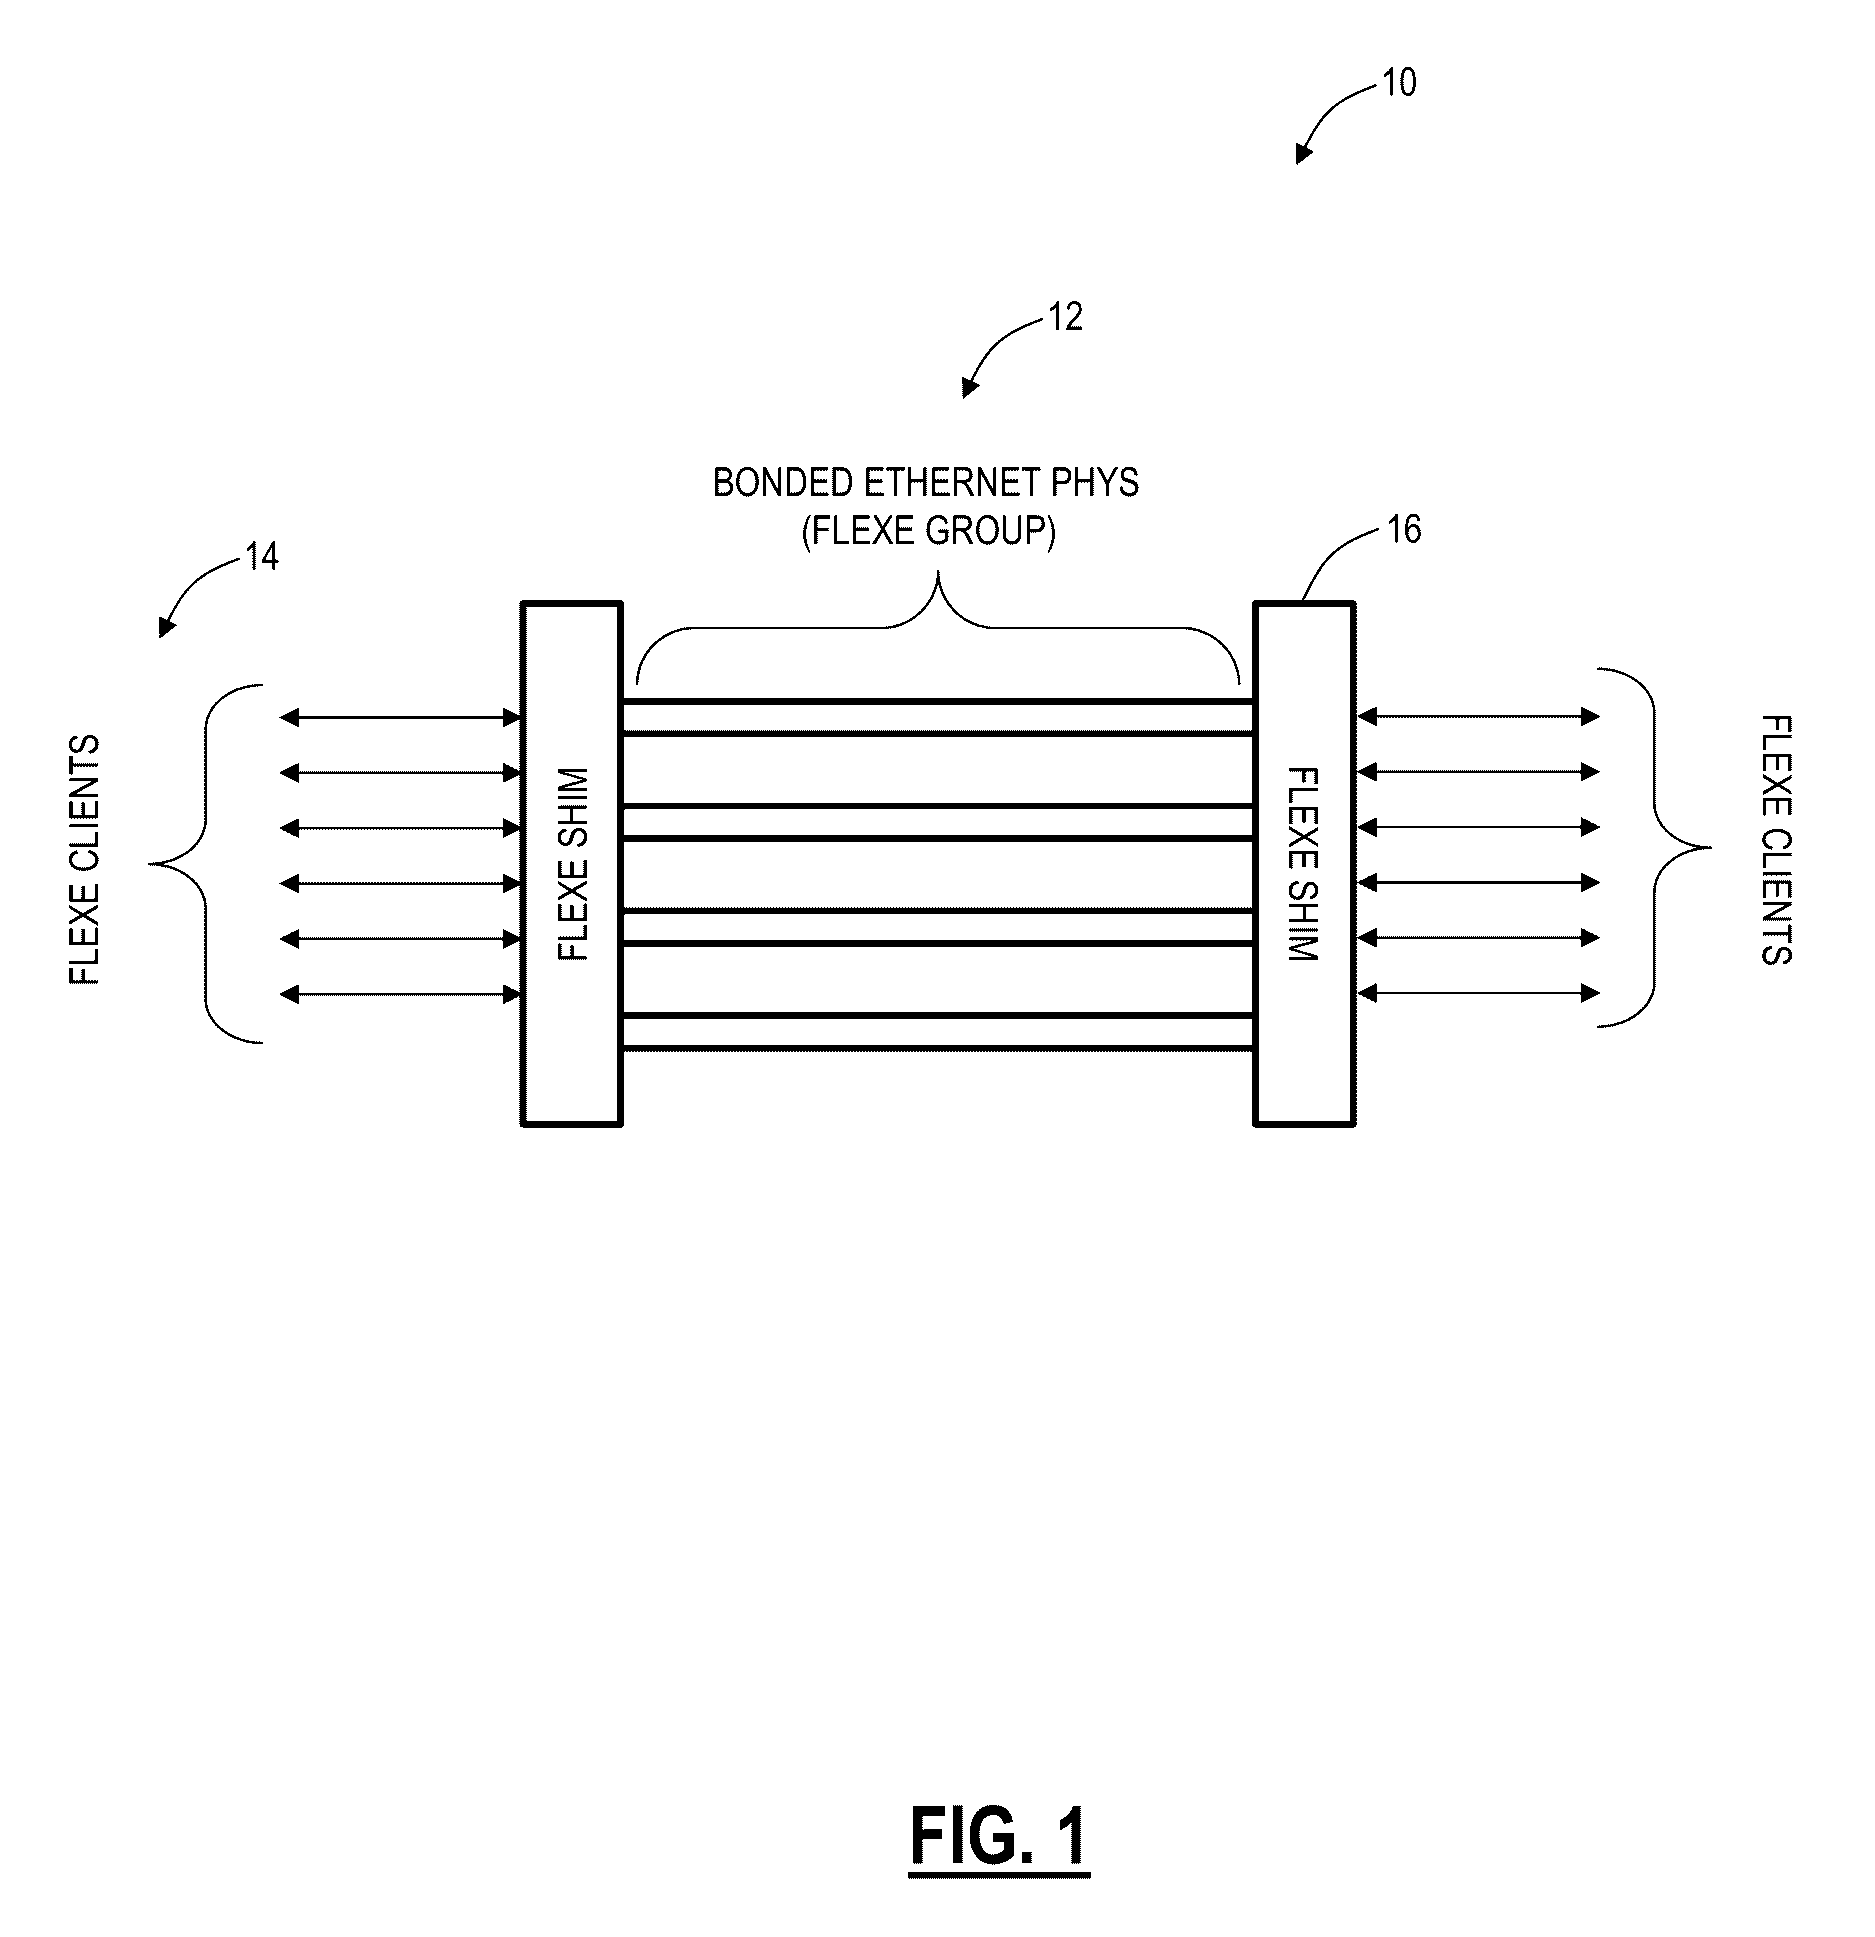 Flexible ethernet client multi-service and timing transparency systems and methods